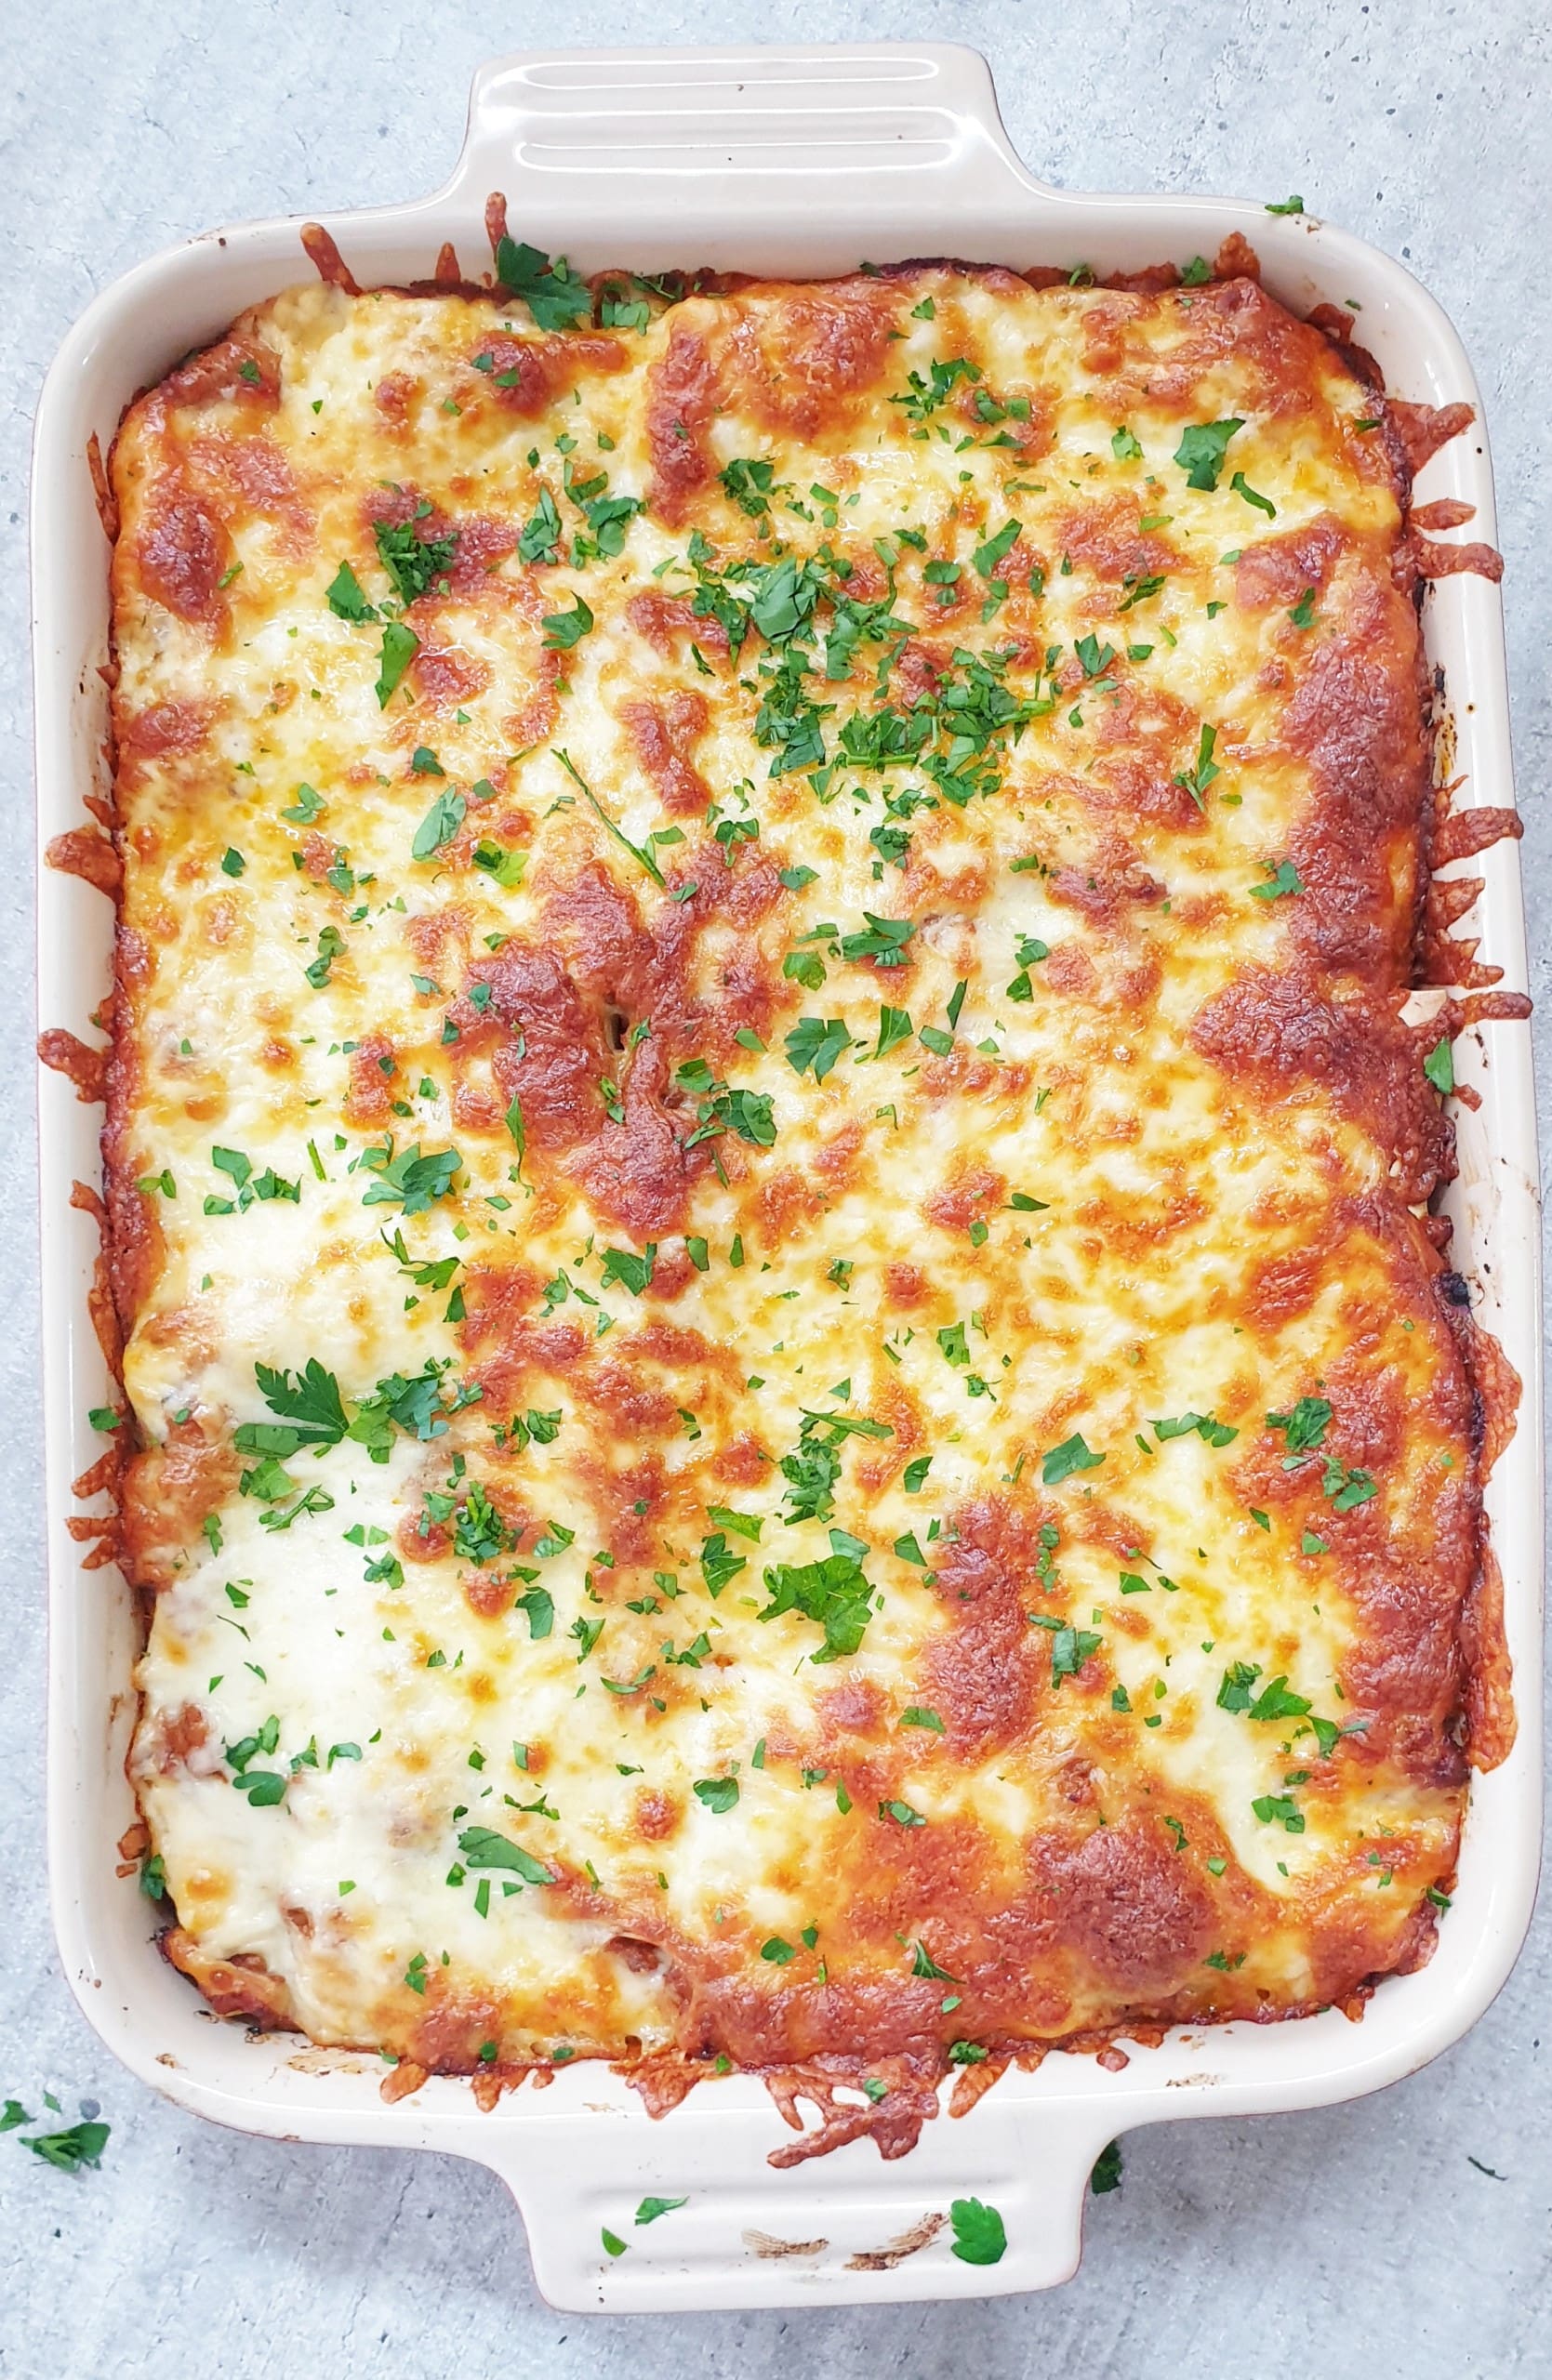 Lasagna Recipe With a Cheesy Sauce and Meat Filling